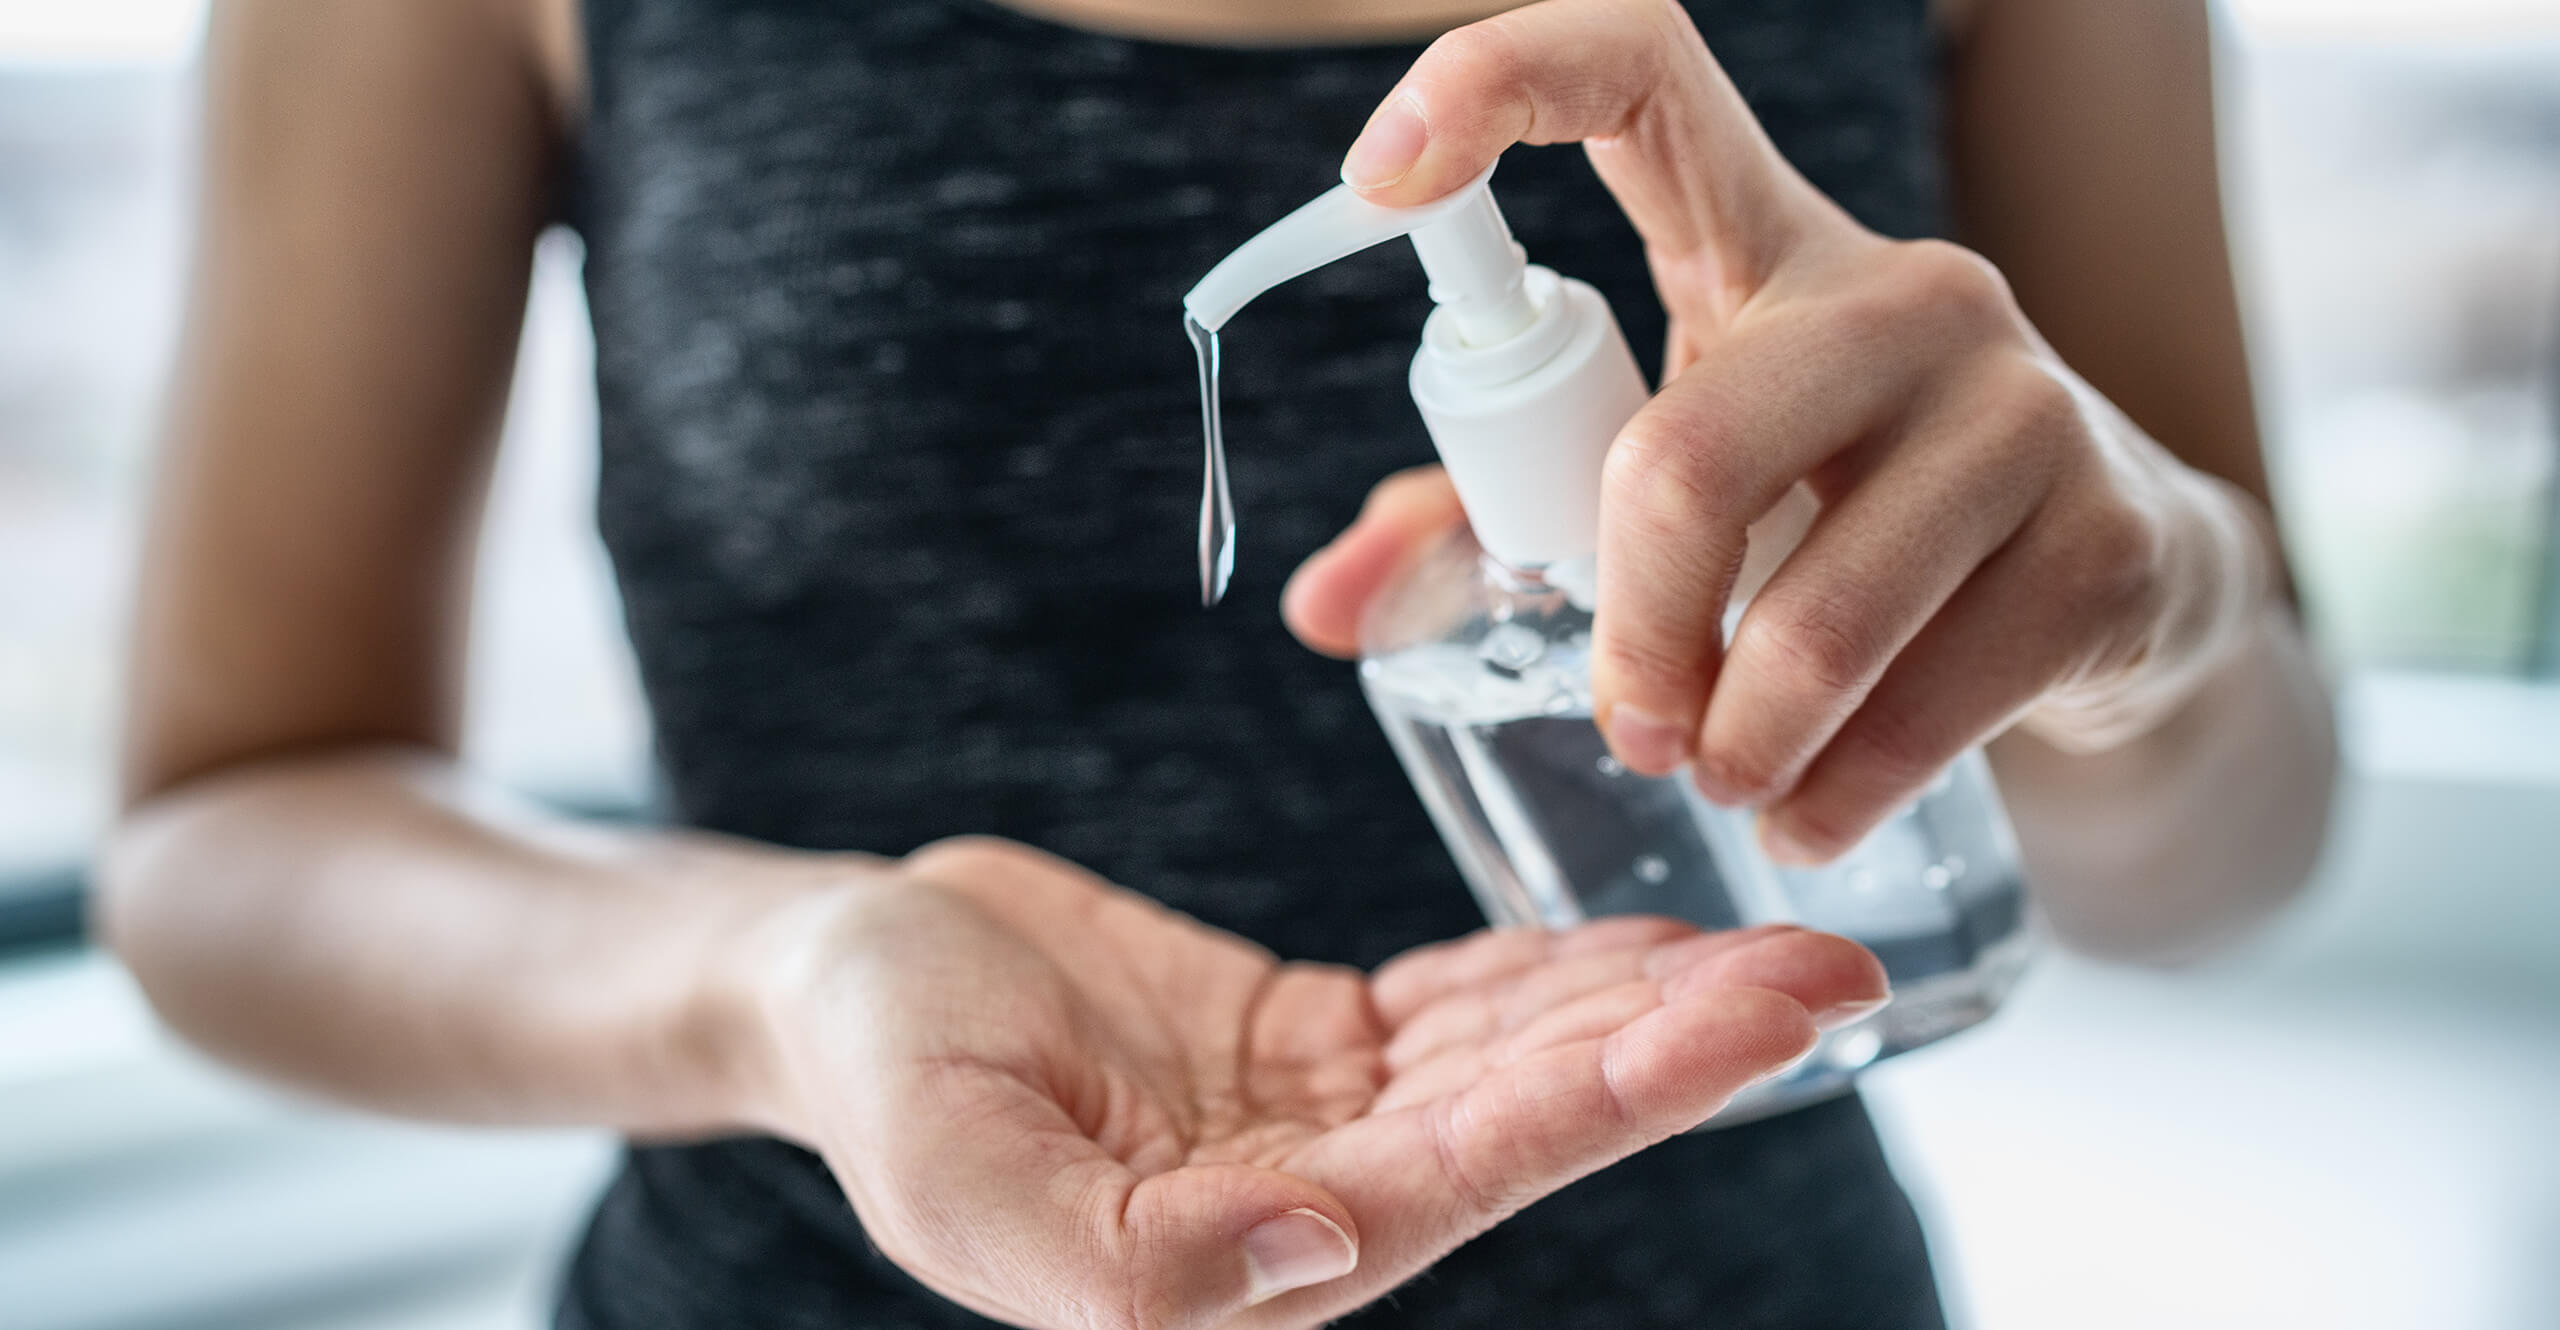 Woman using hand sanitizer from a bottle manufactured using medical injection molding